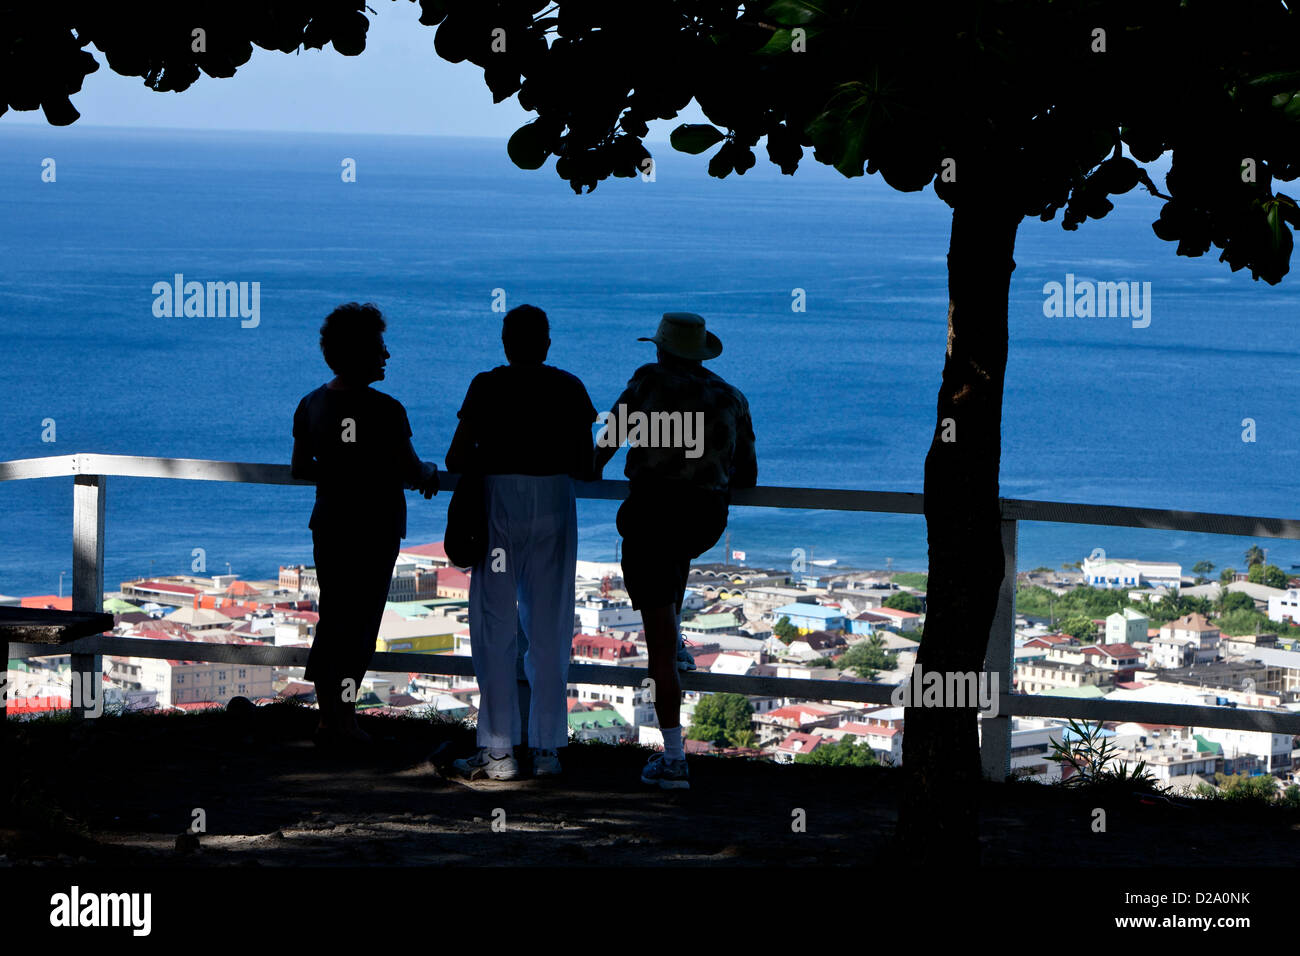 three tourists stand silhouetted, at the railing overlooking the Caribbean ocean and blue sky Stock Photo